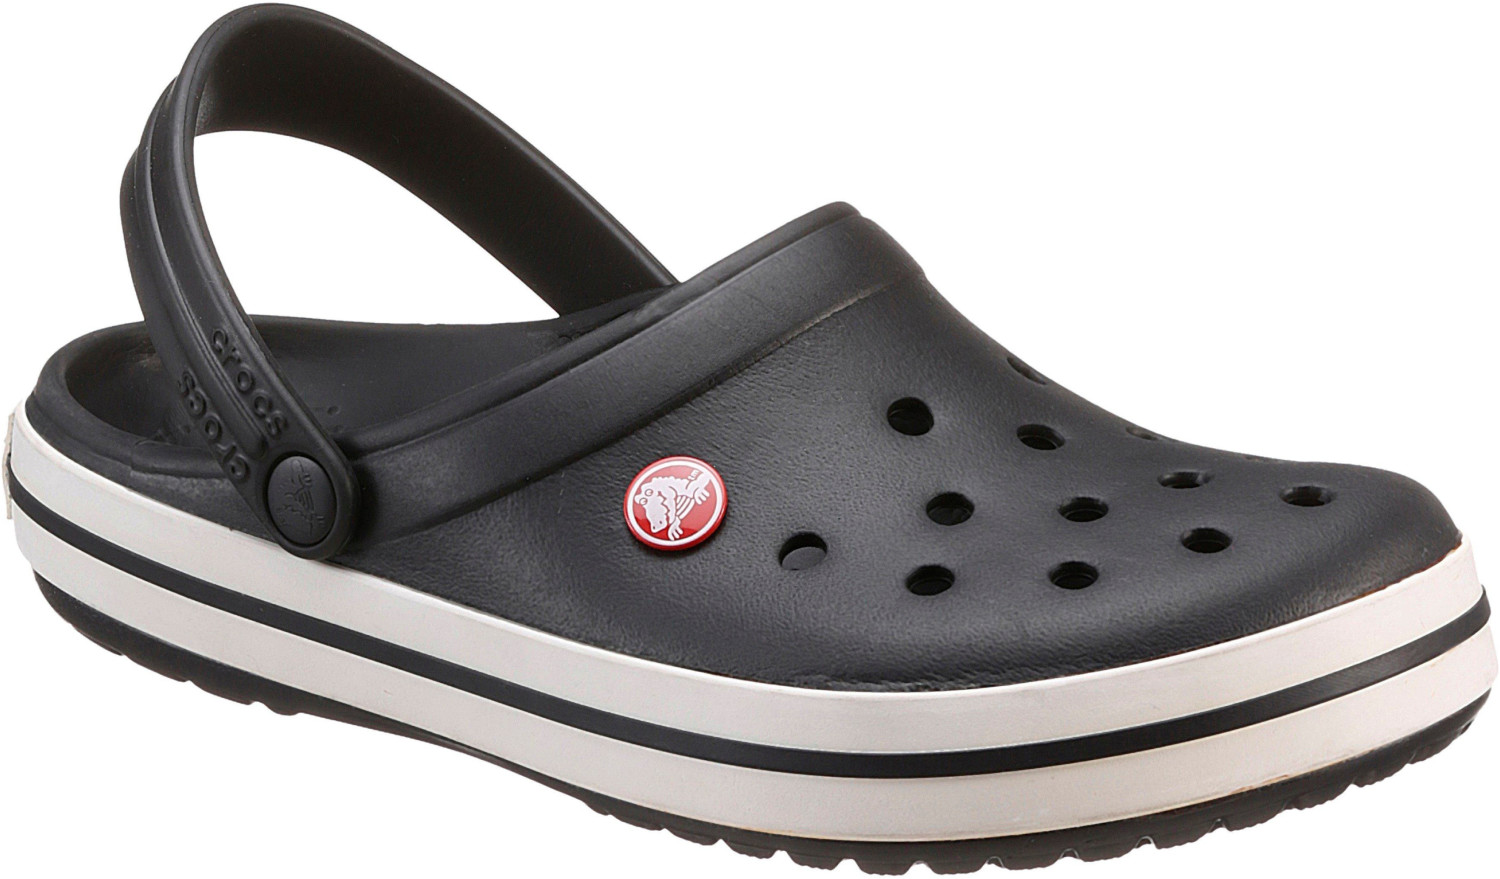 Buy Crocs Crocband black from £26.77 (Today) – Best Deals on idealo.co.uk